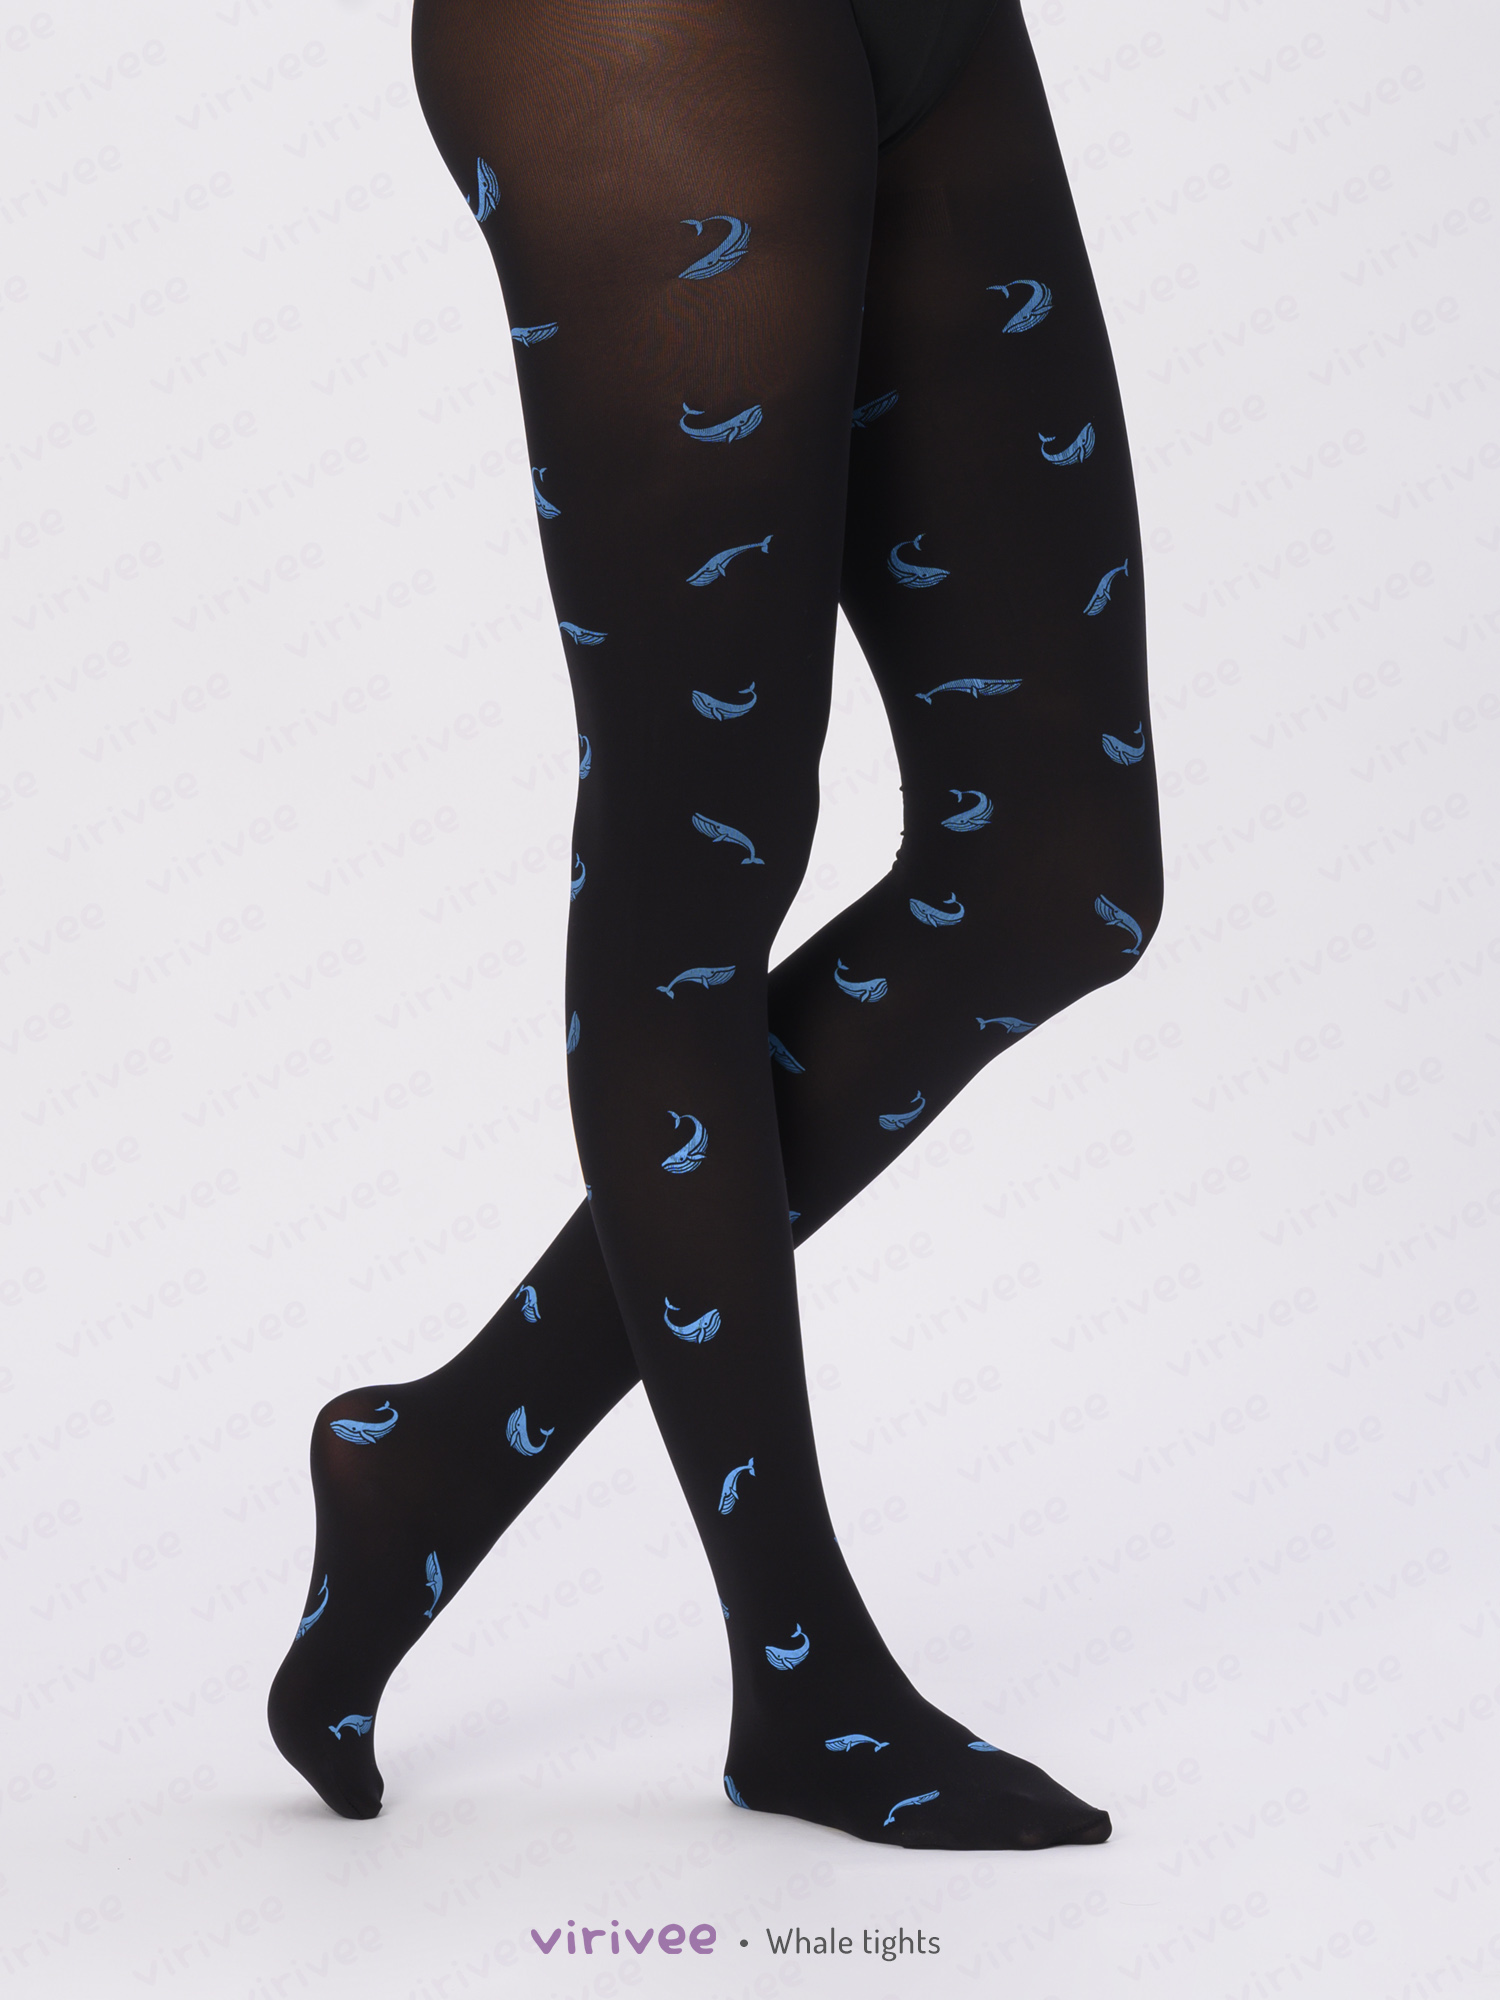 Blue whale tights